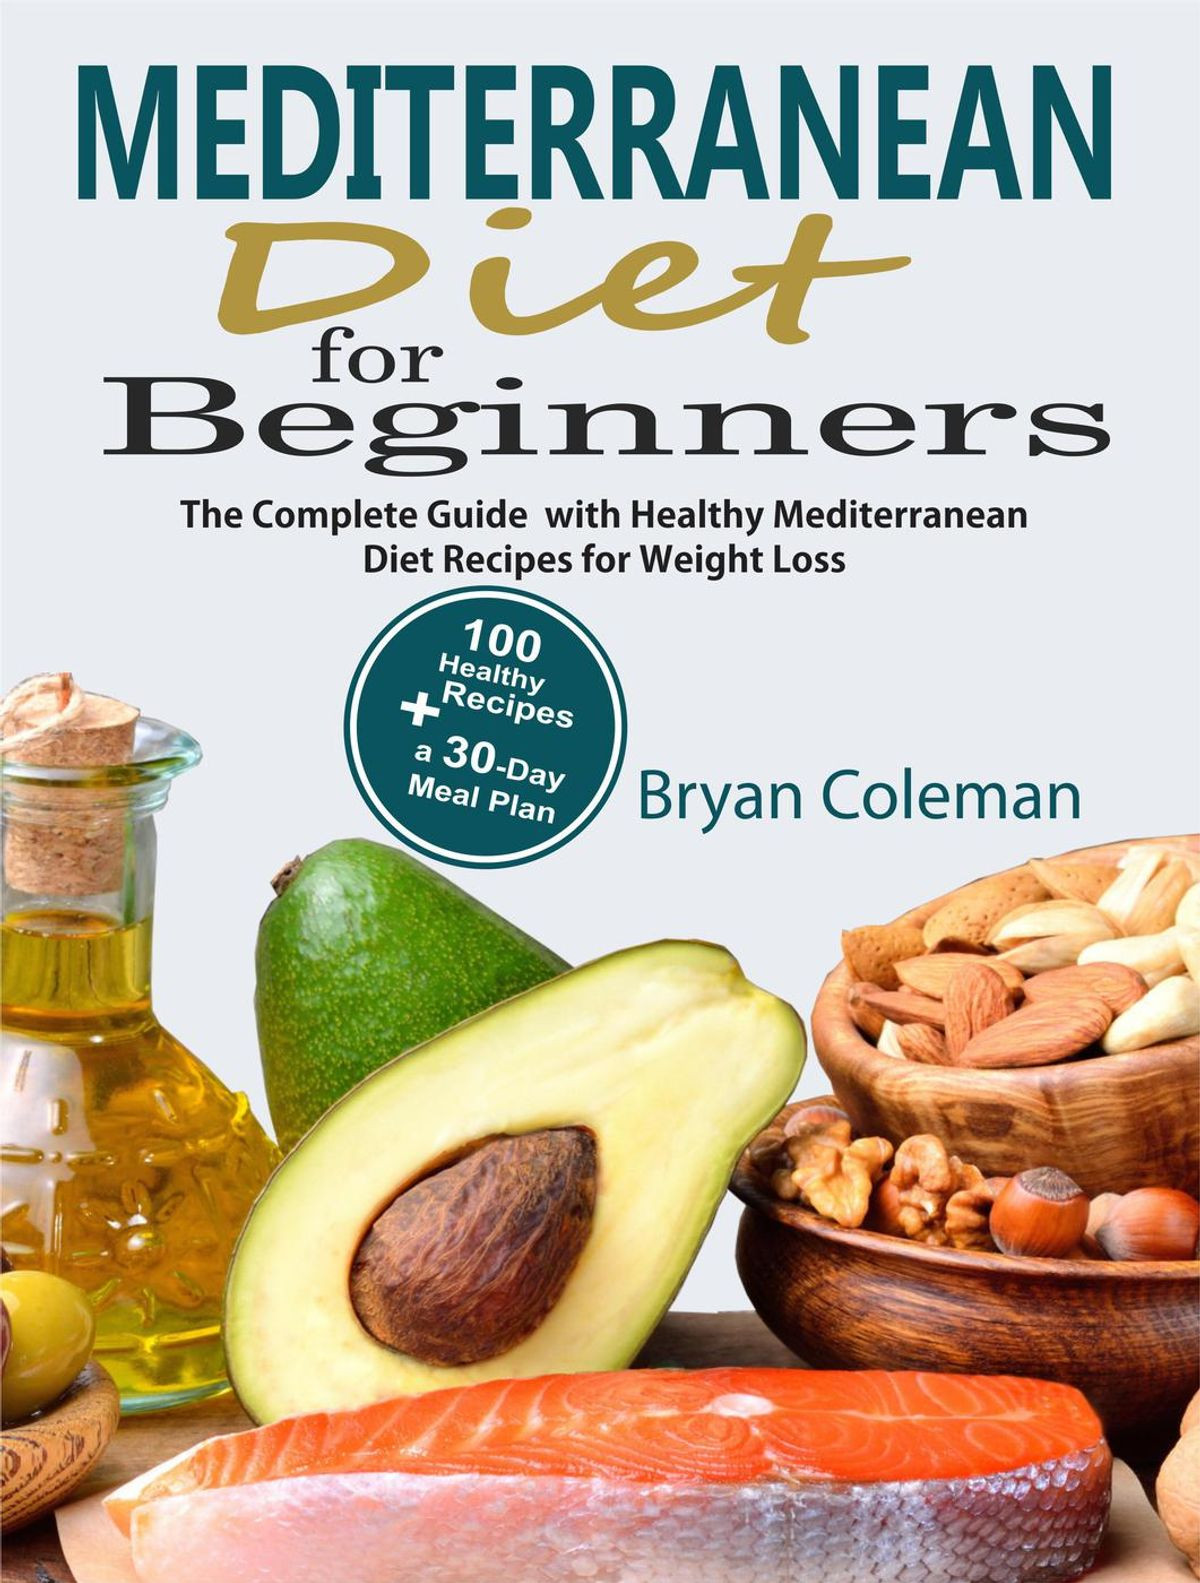 Mediterranean Weight Loss Meal Plan
 Mediterranean Diet for Beginners The plete Guide and